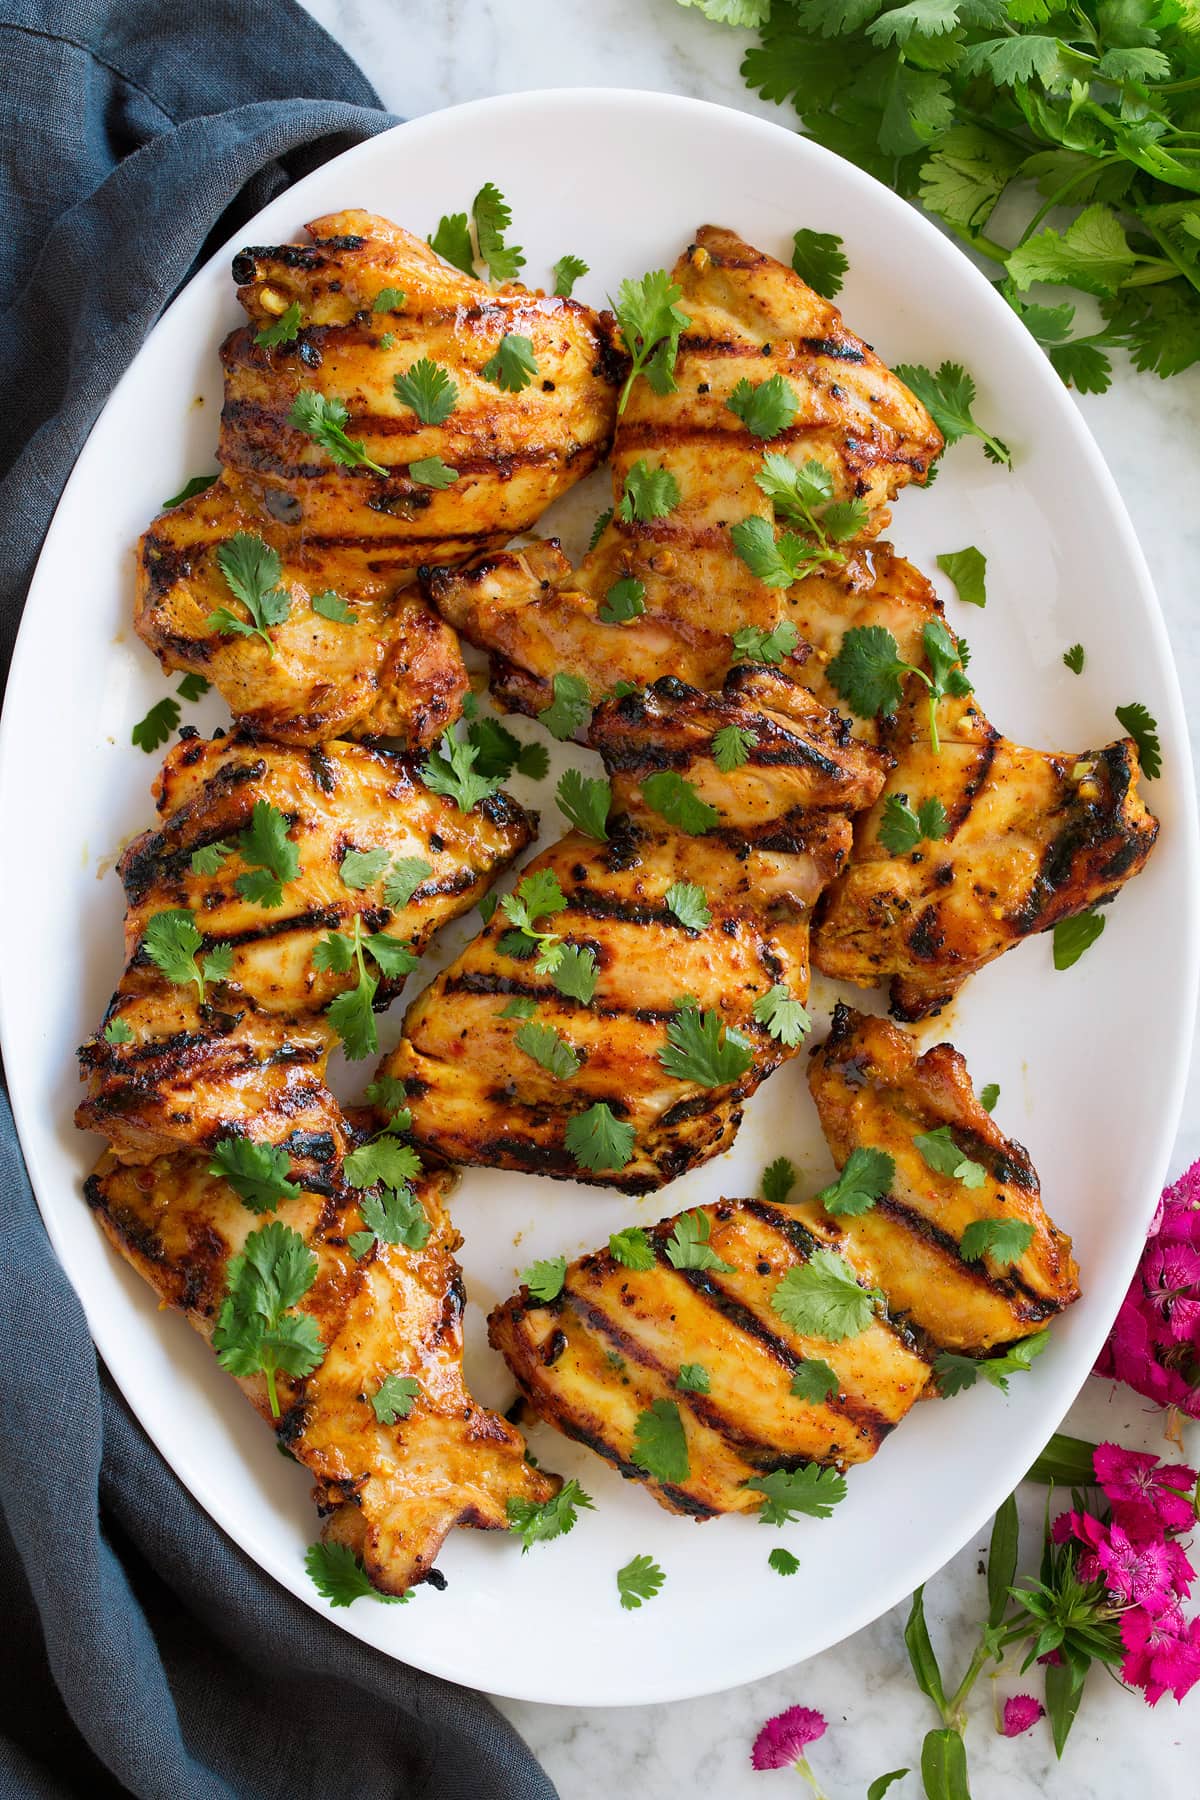 Thai Coconut Grilled Chicken Thighs shown overhead on a white oval platter. Chicken is garnished with cilantro and flowers are shown to the side.